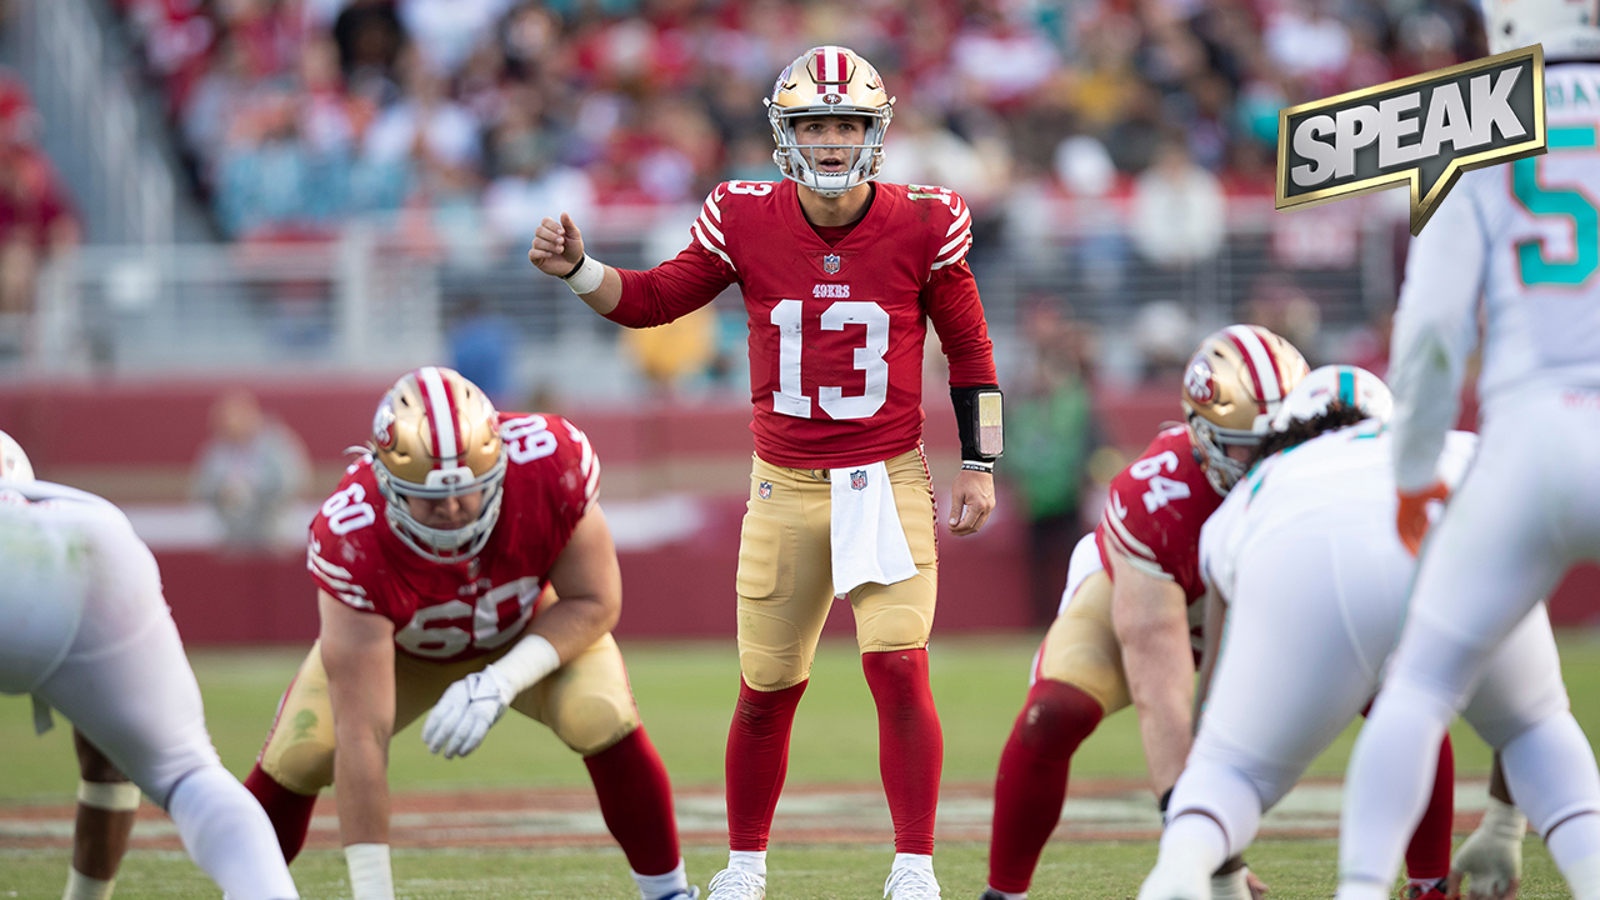 Are 49ers legit Super Bowl contenders with Brock Purdy at QB?